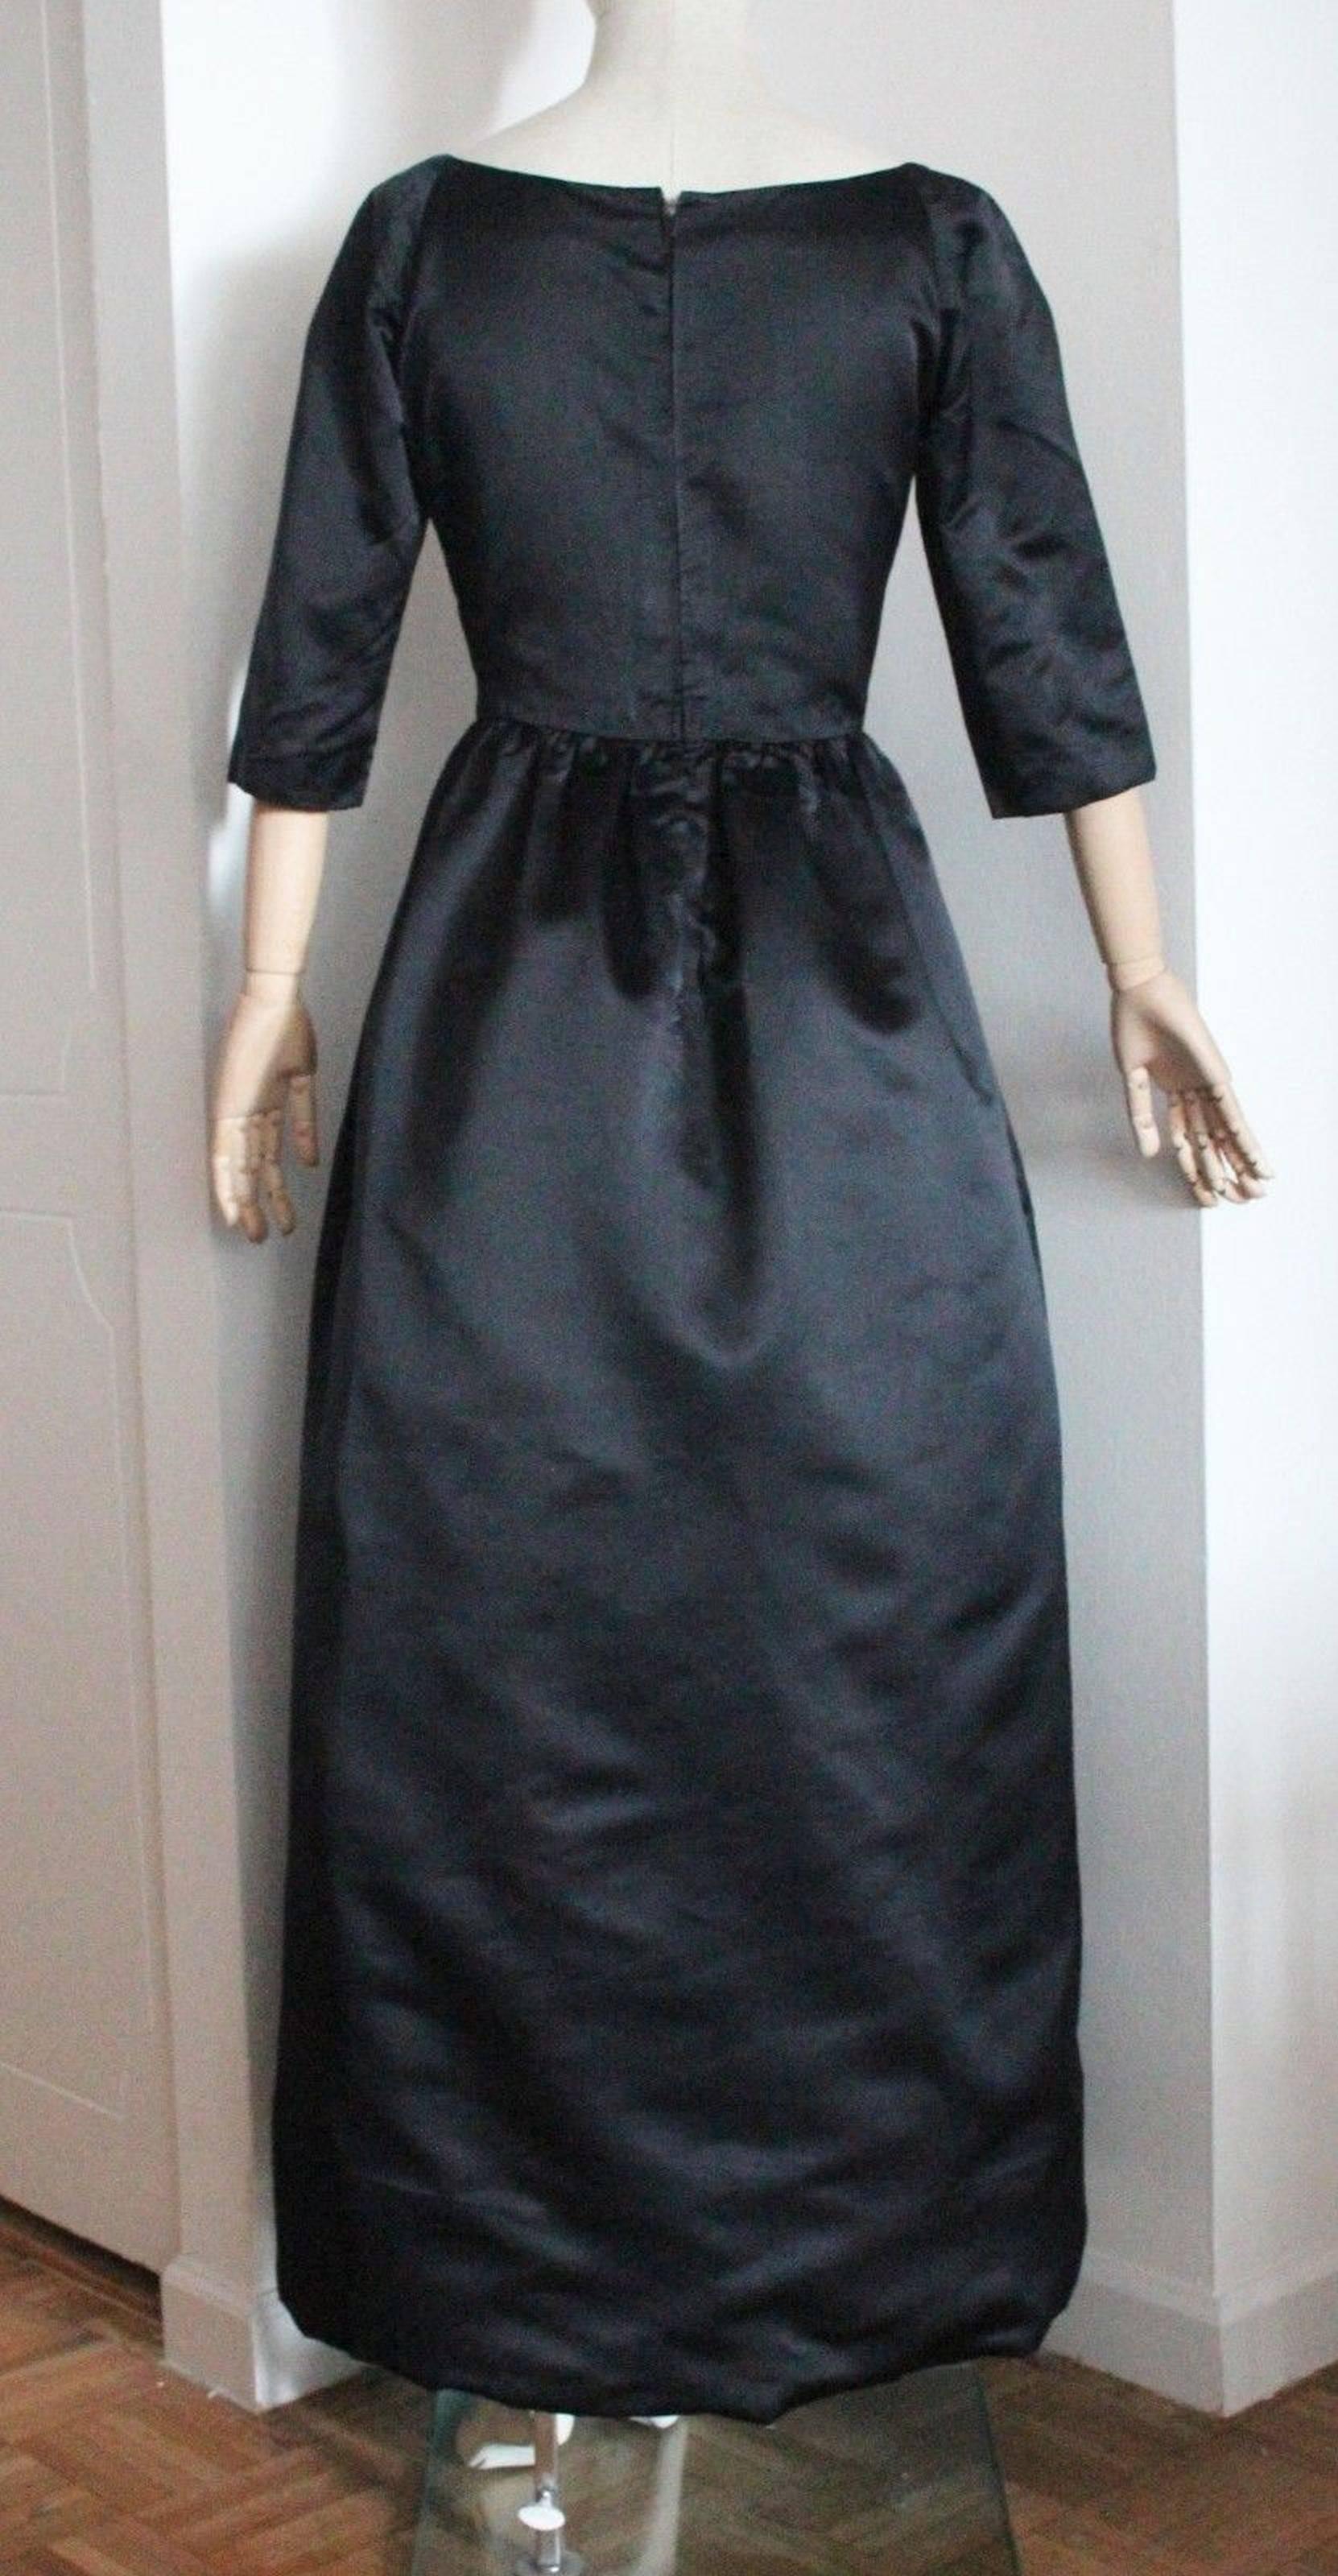 Museum Quality 1958 Christian Dior Black Satin Evening Dress With Bow In Excellent Condition For Sale In London, UK